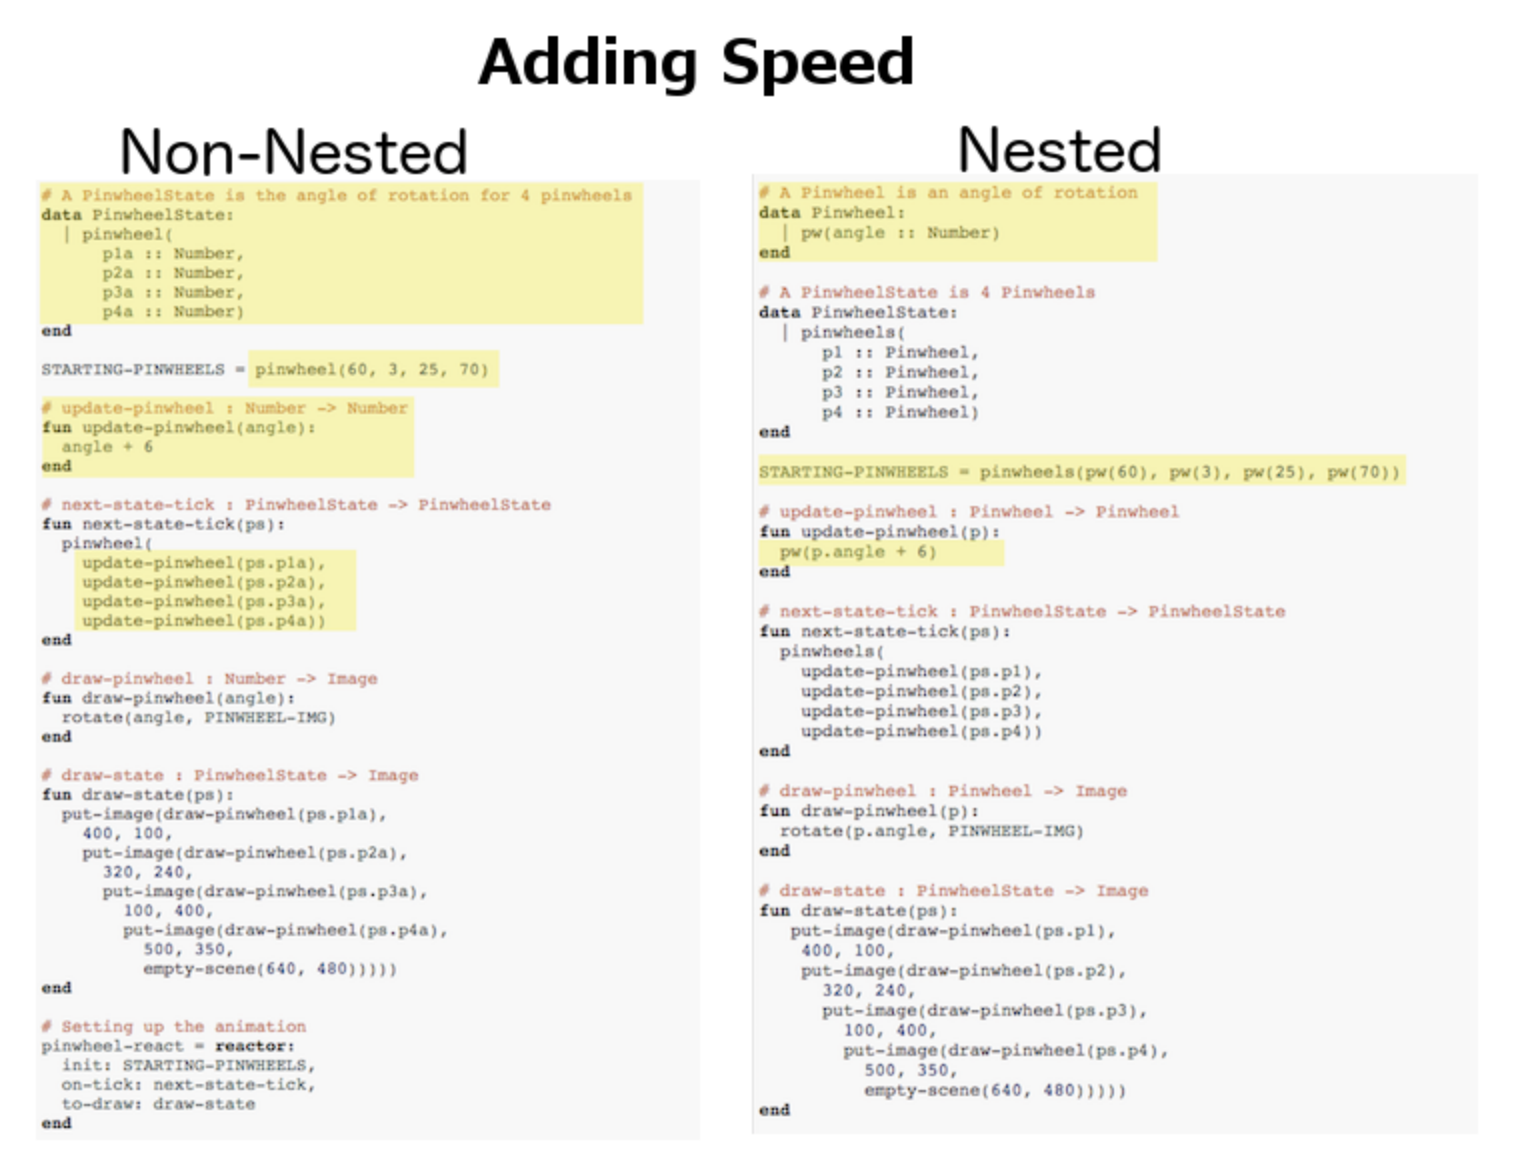 A side-by-side comparison of the code changes required to add a speed to the non-nested and nested versions of the pinwheels file. The nested version requires far fewer changes.